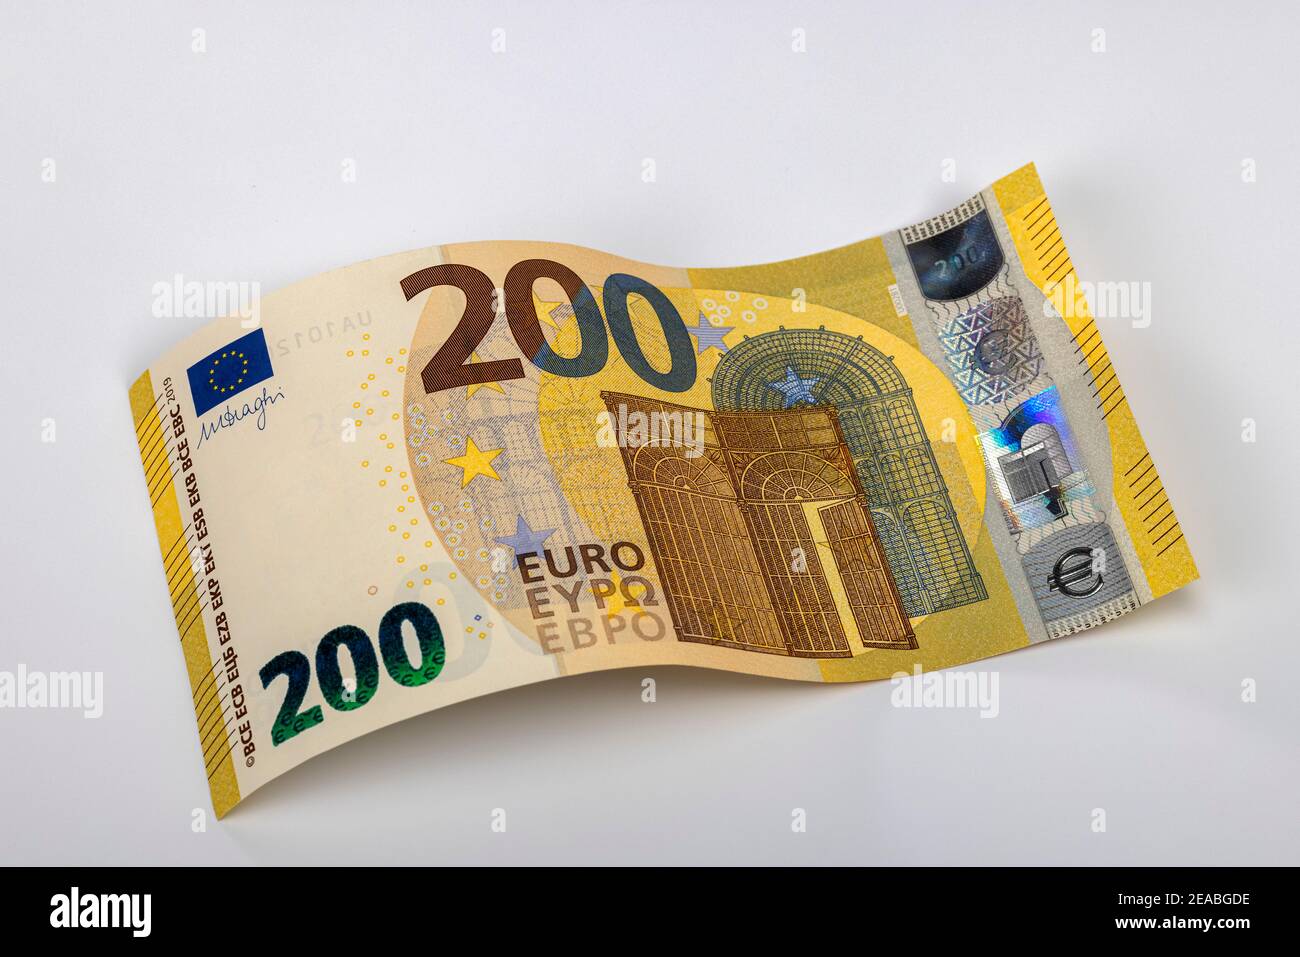 200 euro banknote in the form of a wave, Stock Photo